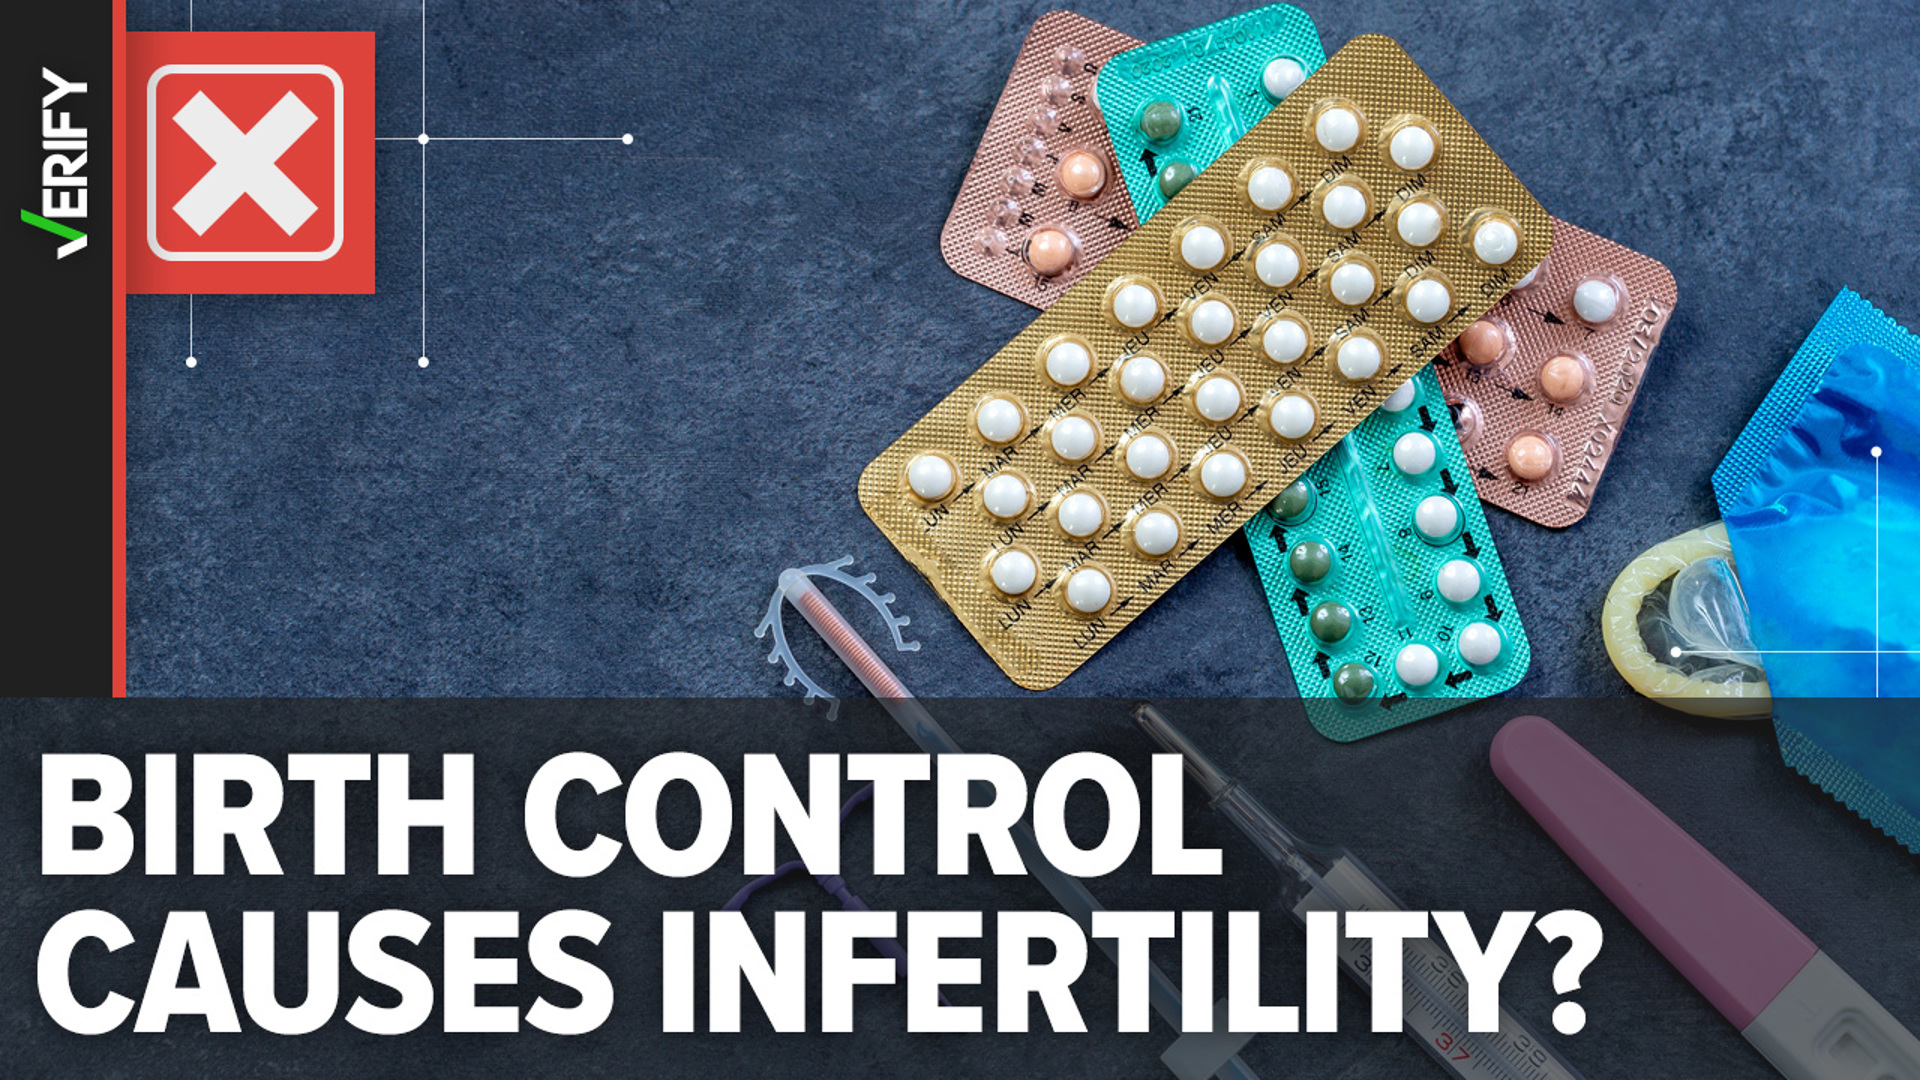 “Using hormonal birth control doesn’t affect your ability to have a baby in the future,” Miriam Cremer, M.D., women’s health specialist at the Cleveland Clinic says.